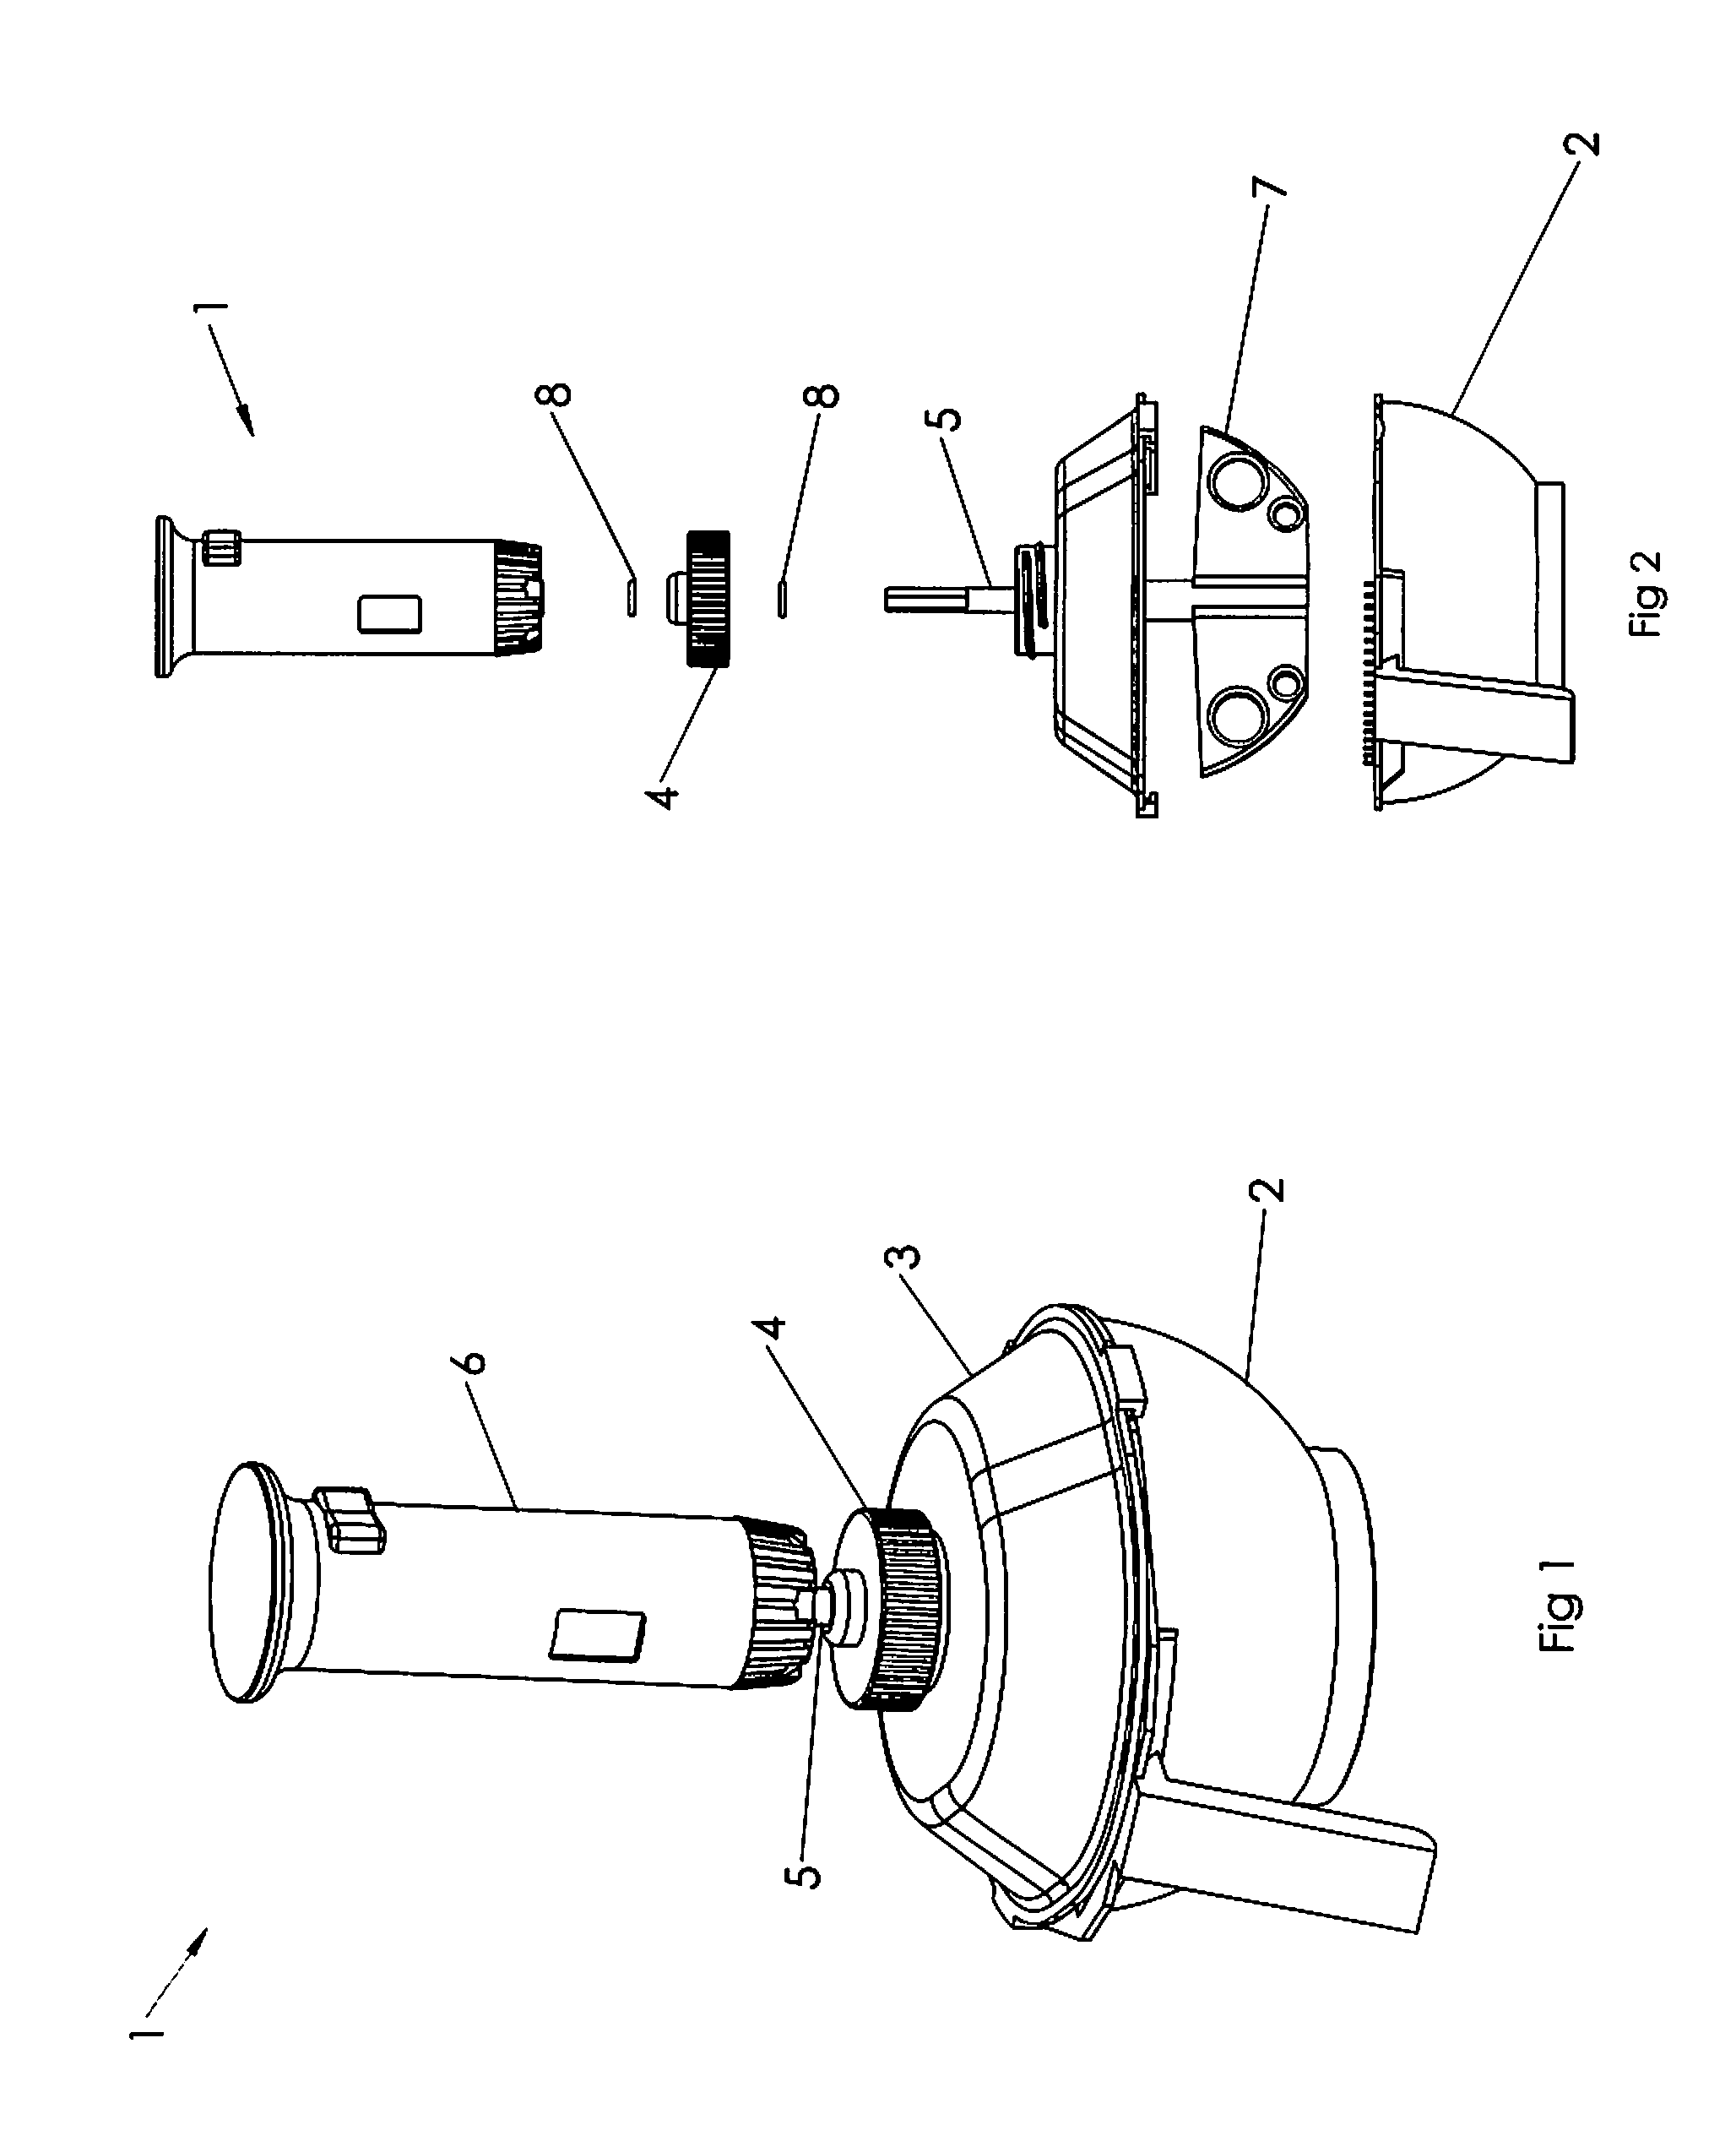 Apparatus for mixing hair colorant chemicals